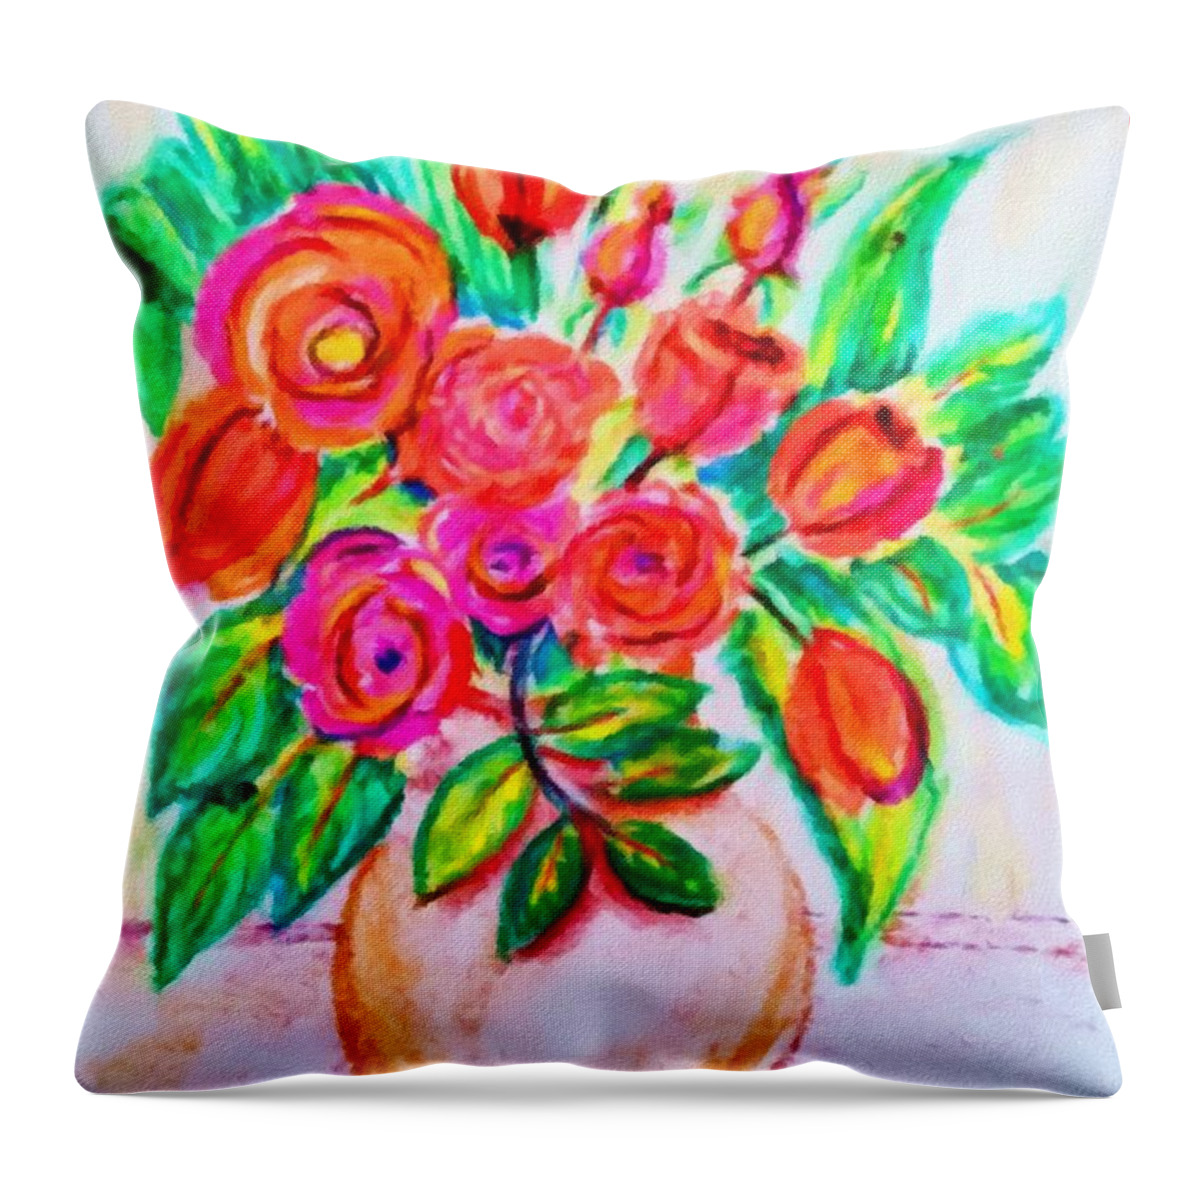 Pink Throw Pillow featuring the digital art Pink and Orange Floral Bouquet Pastel Chalk Digitally Altered by Delynn Addams